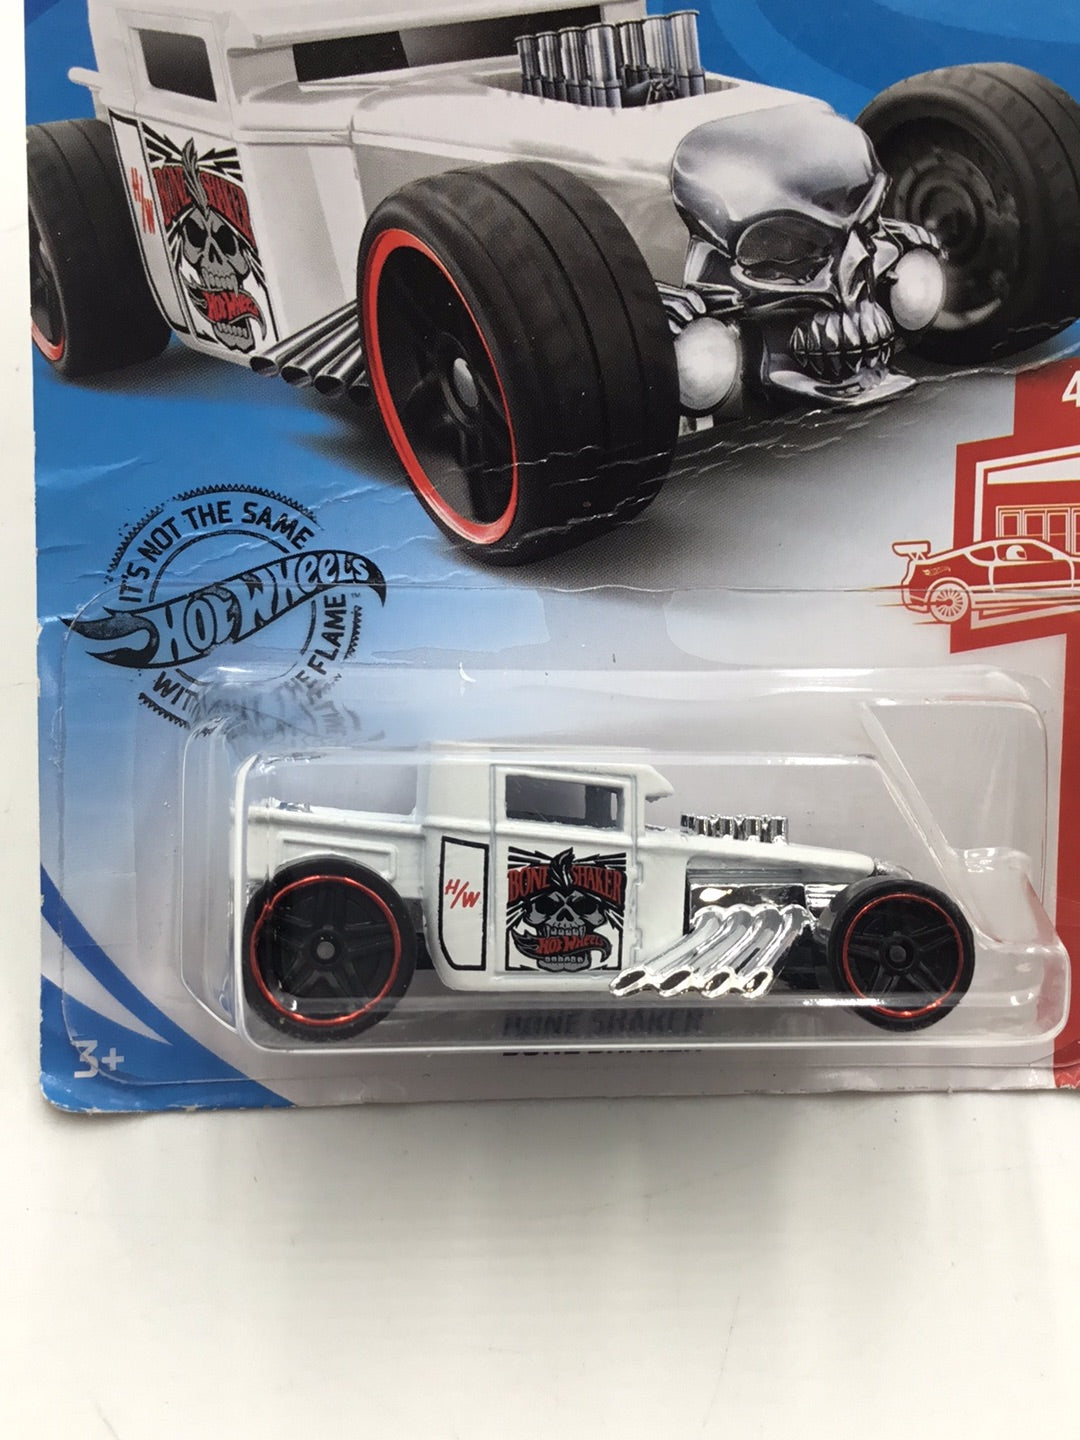 2020 hot wheels red edition #135 Bone Shaker target red (Bad Card) Z9